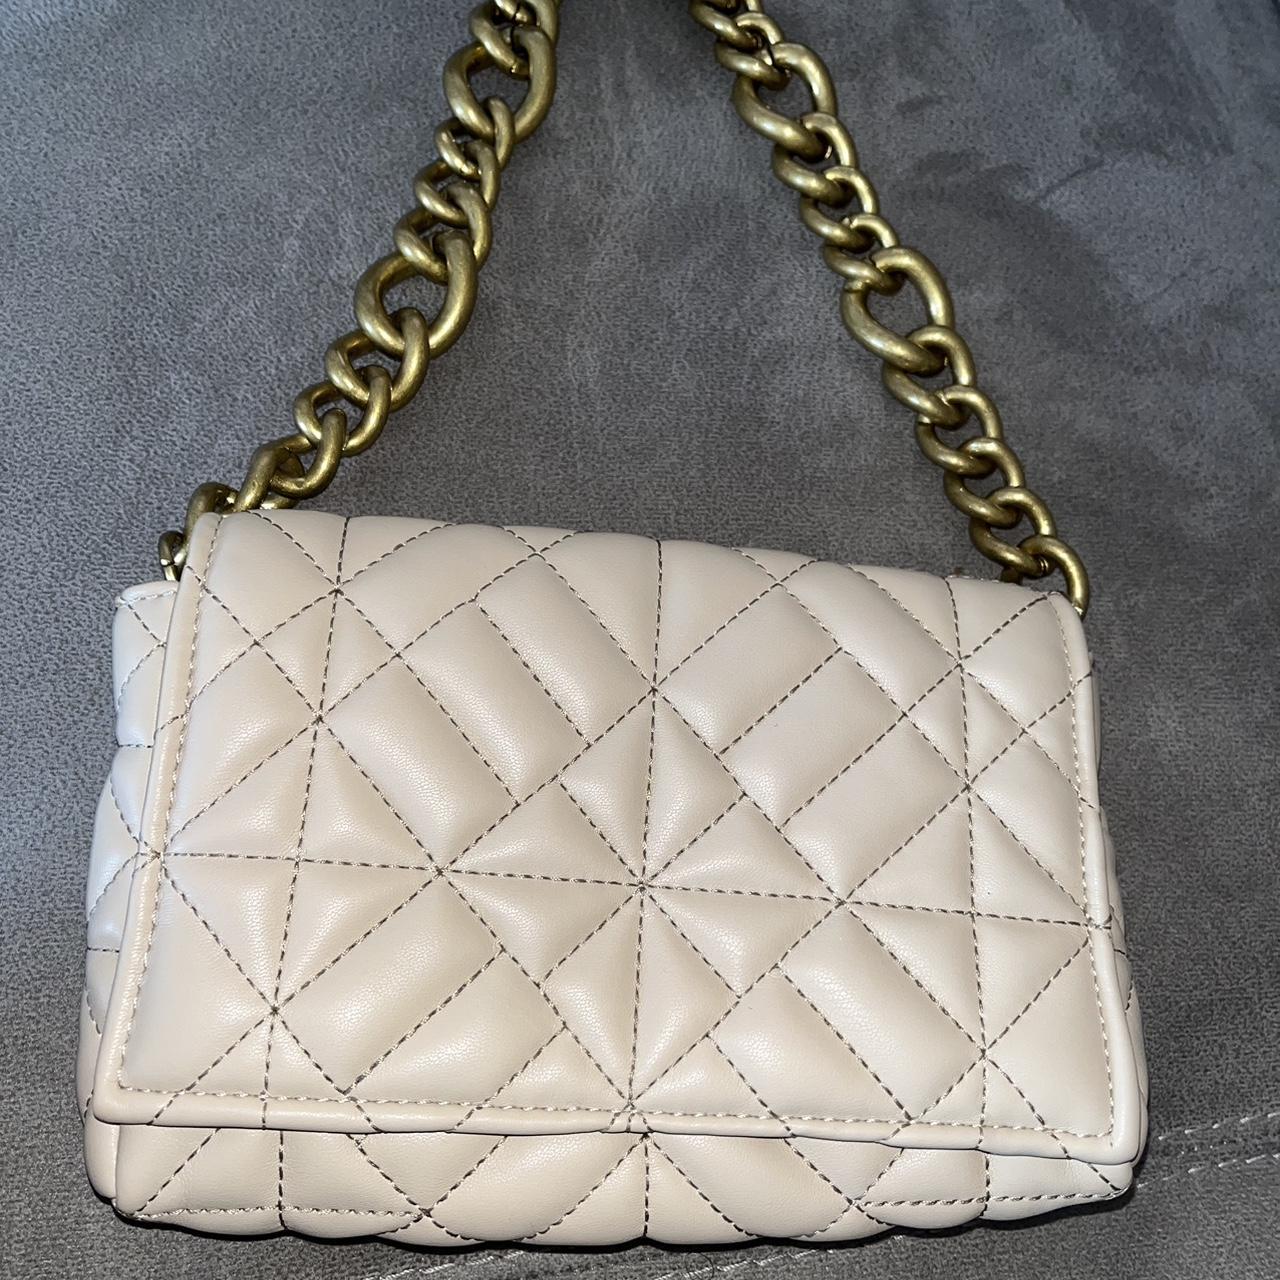 Zara quilted nude bag with gold chain. Worn once.... - Depop